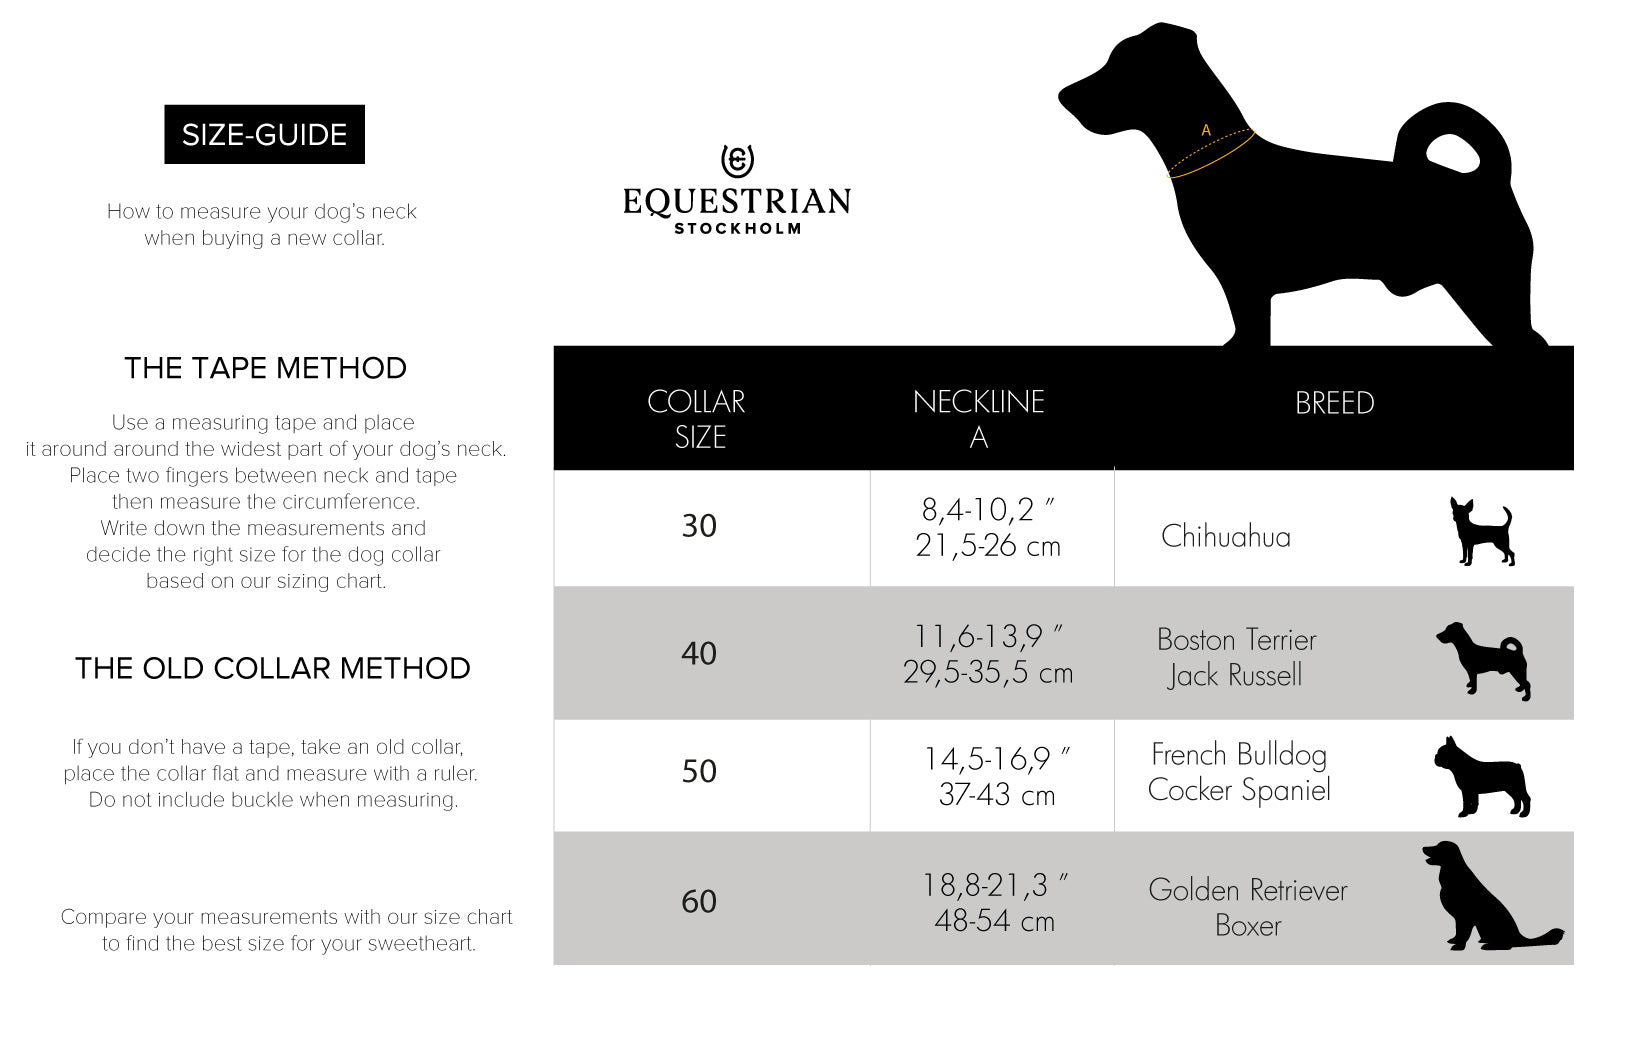 equestrian stockholm dog collar size guide